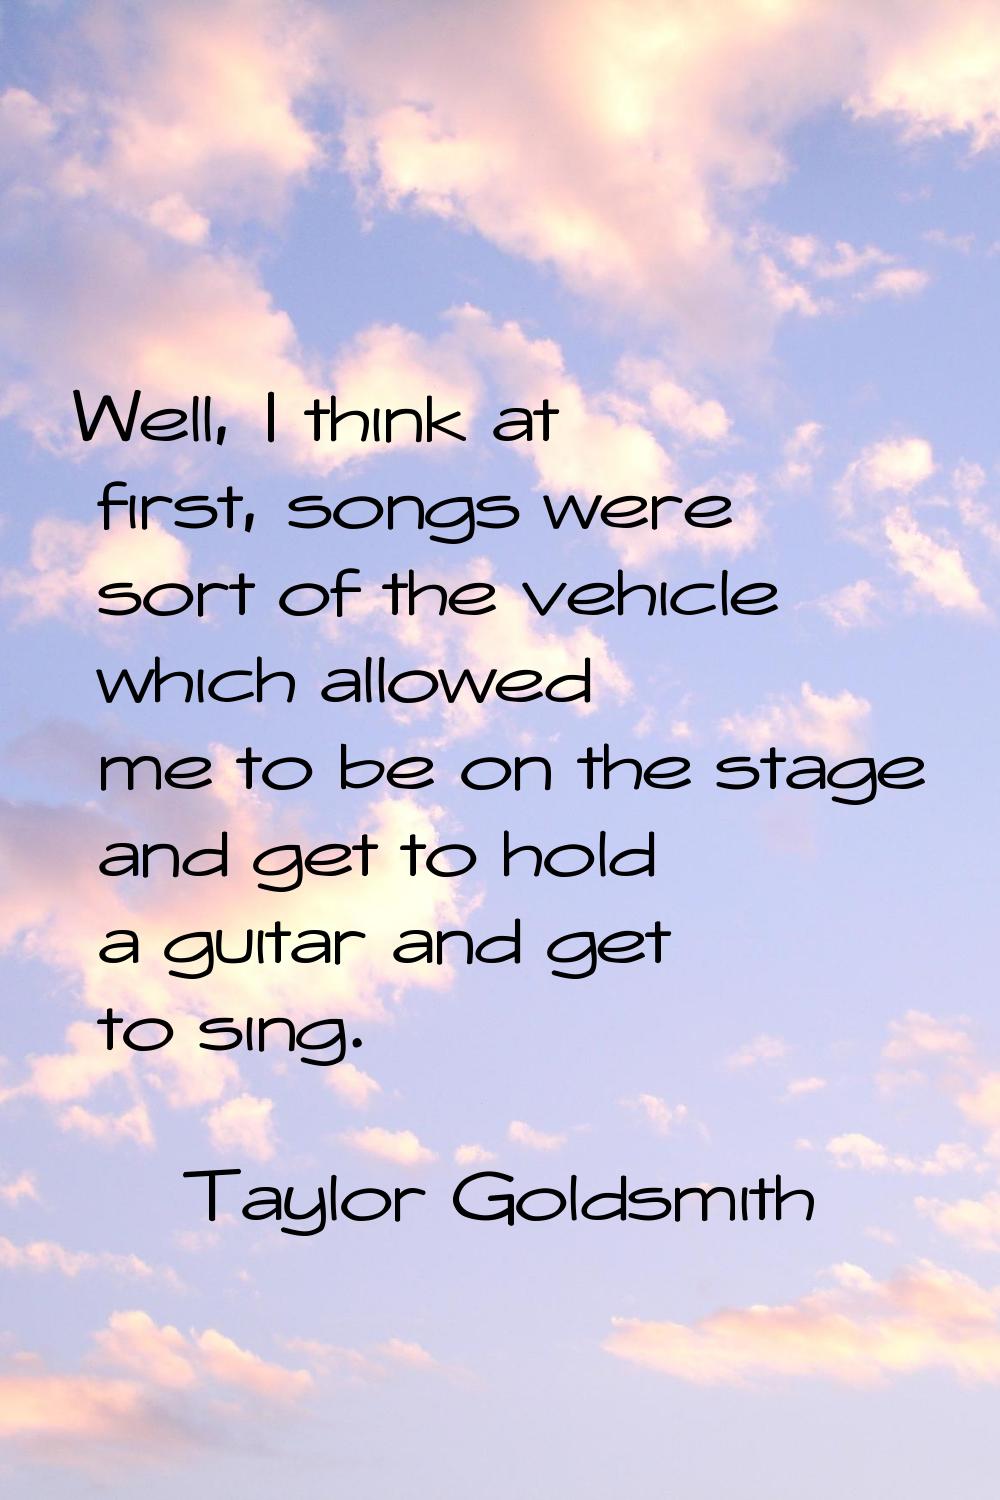 Well, I think at first, songs were sort of the vehicle which allowed me to be on the stage and get 